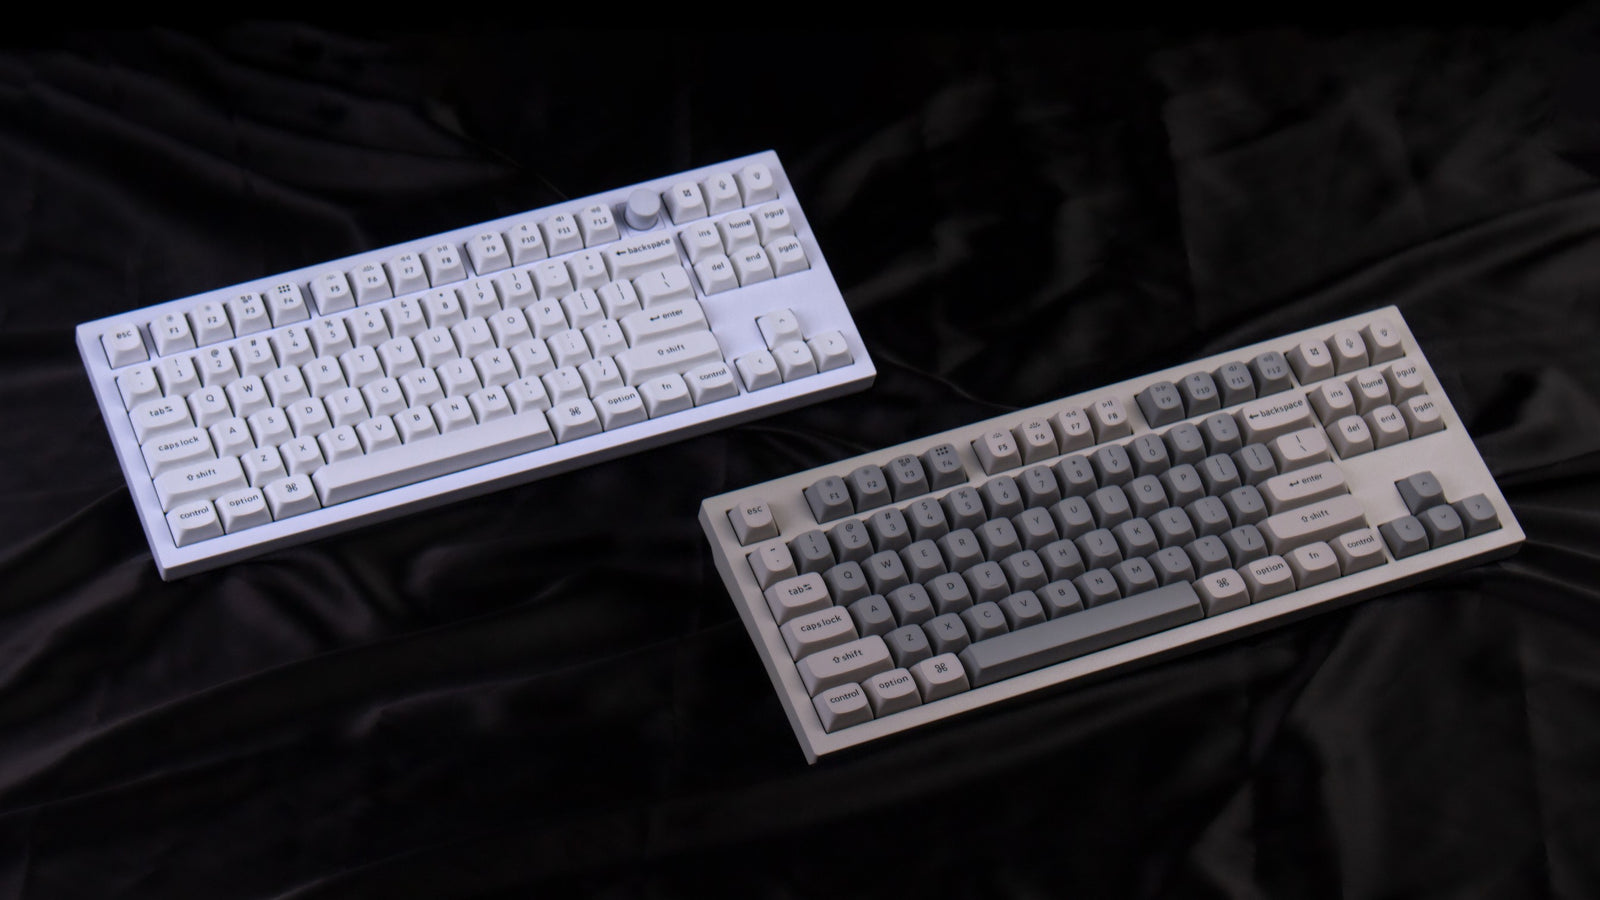 Keychron Keyboard Article Review - June 2022